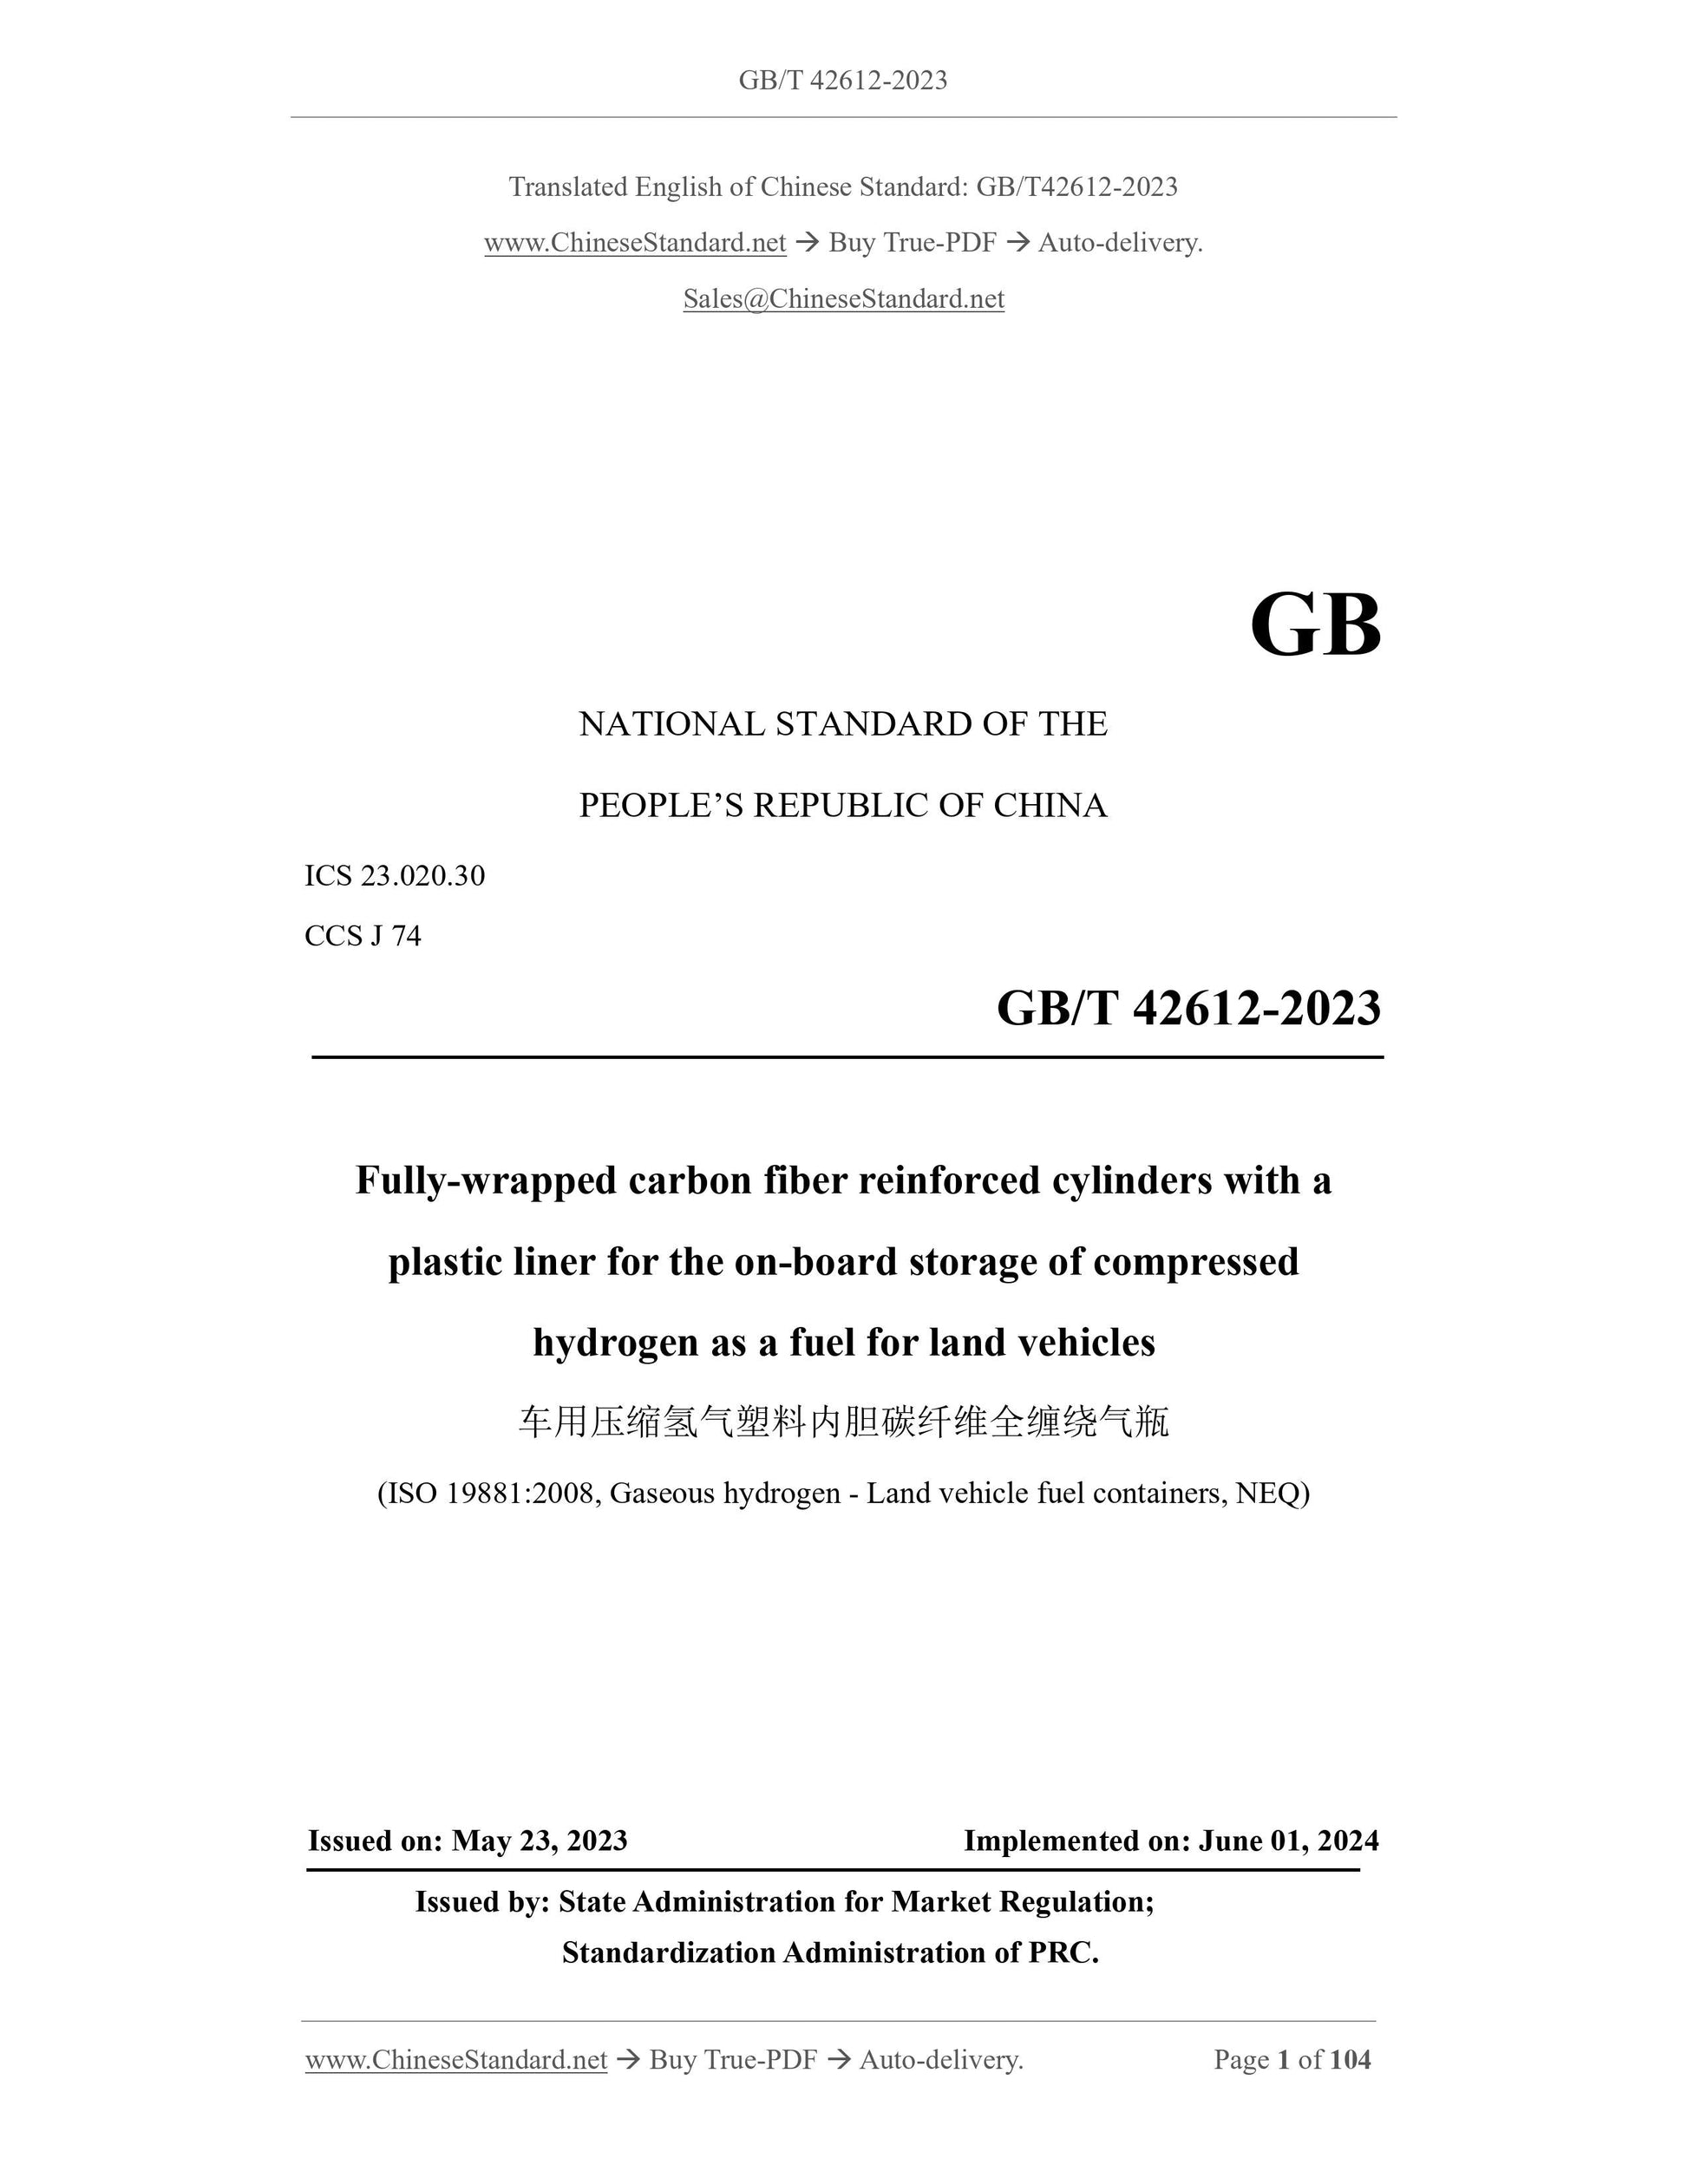 GB/T 42612-2023 Page 1